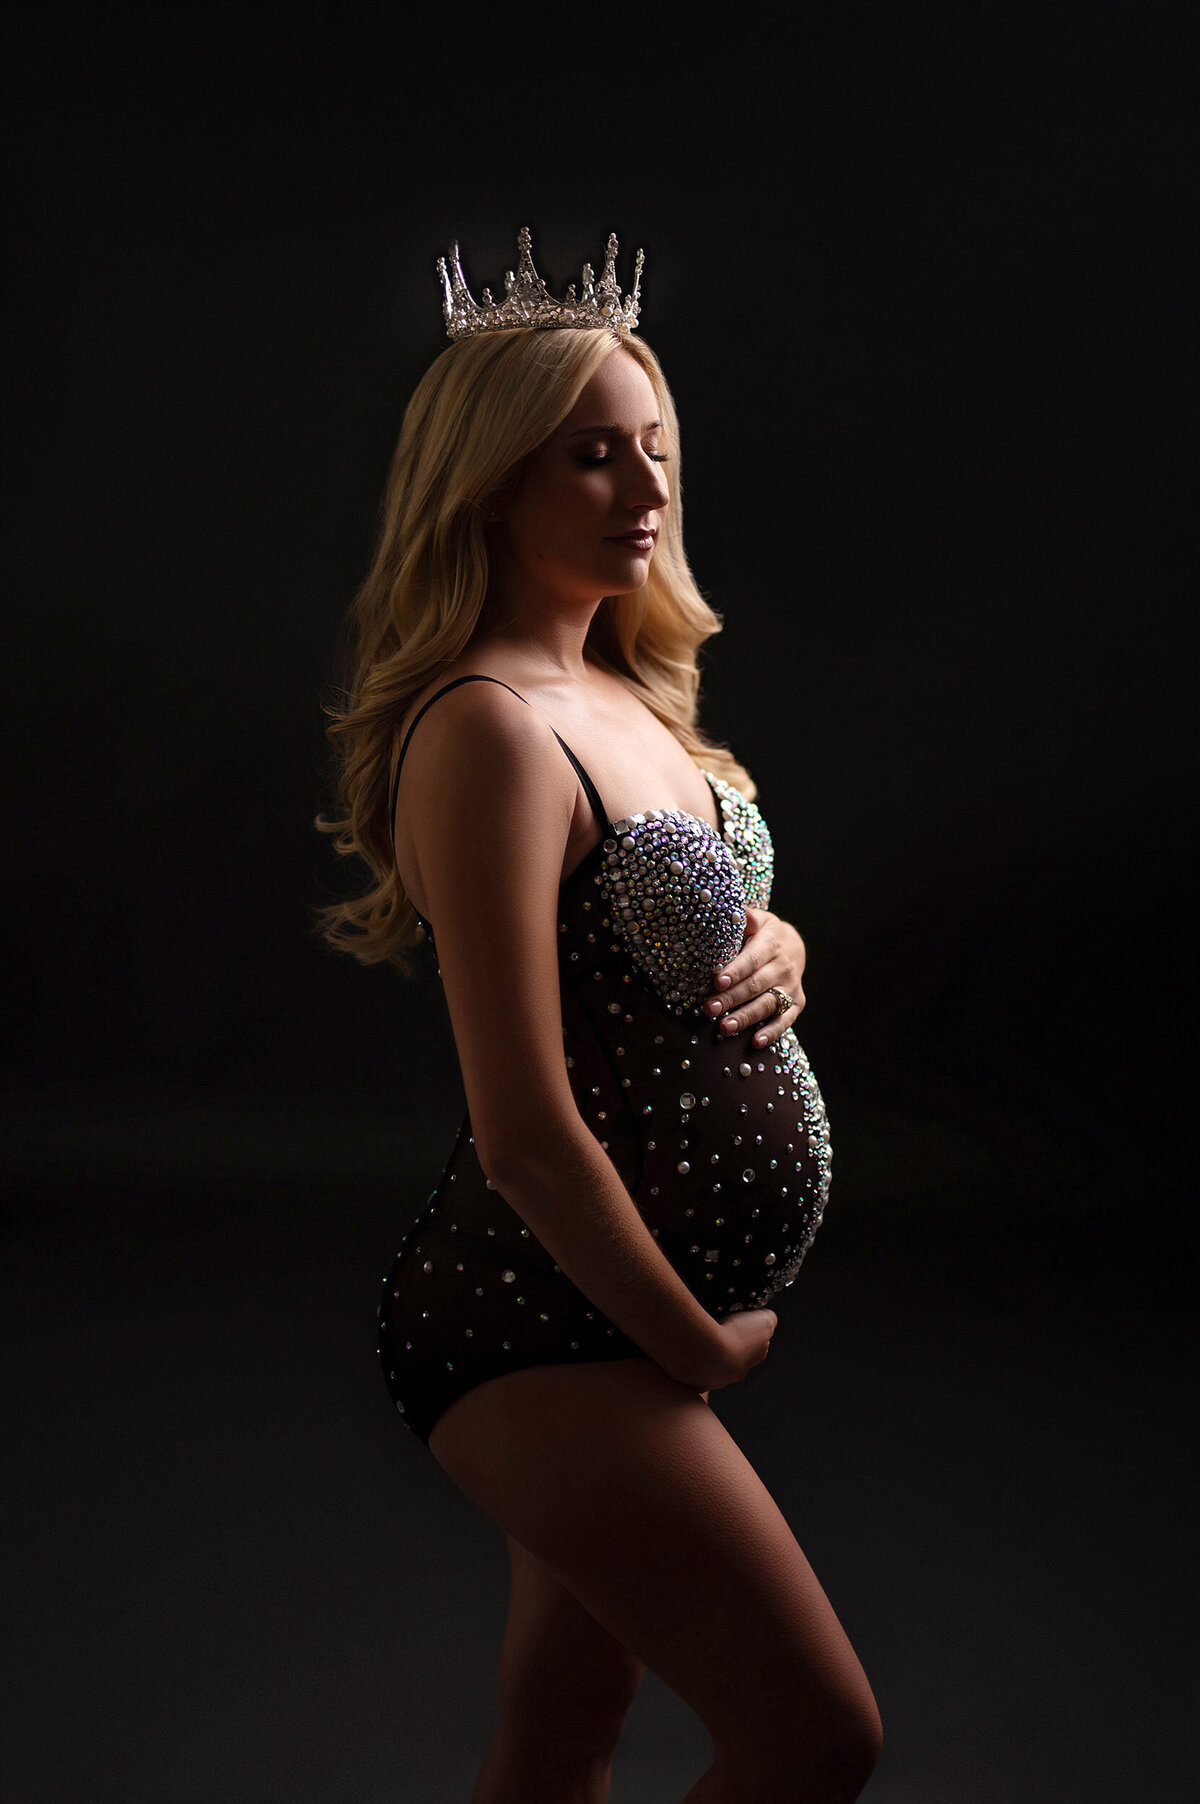 Pregnant woman standing in our Waukesha studio softly crading her belly while wearing a sheer, black maternity bodysuit adorned with pearls and crystals. A matching crown sits on top of her head as well.